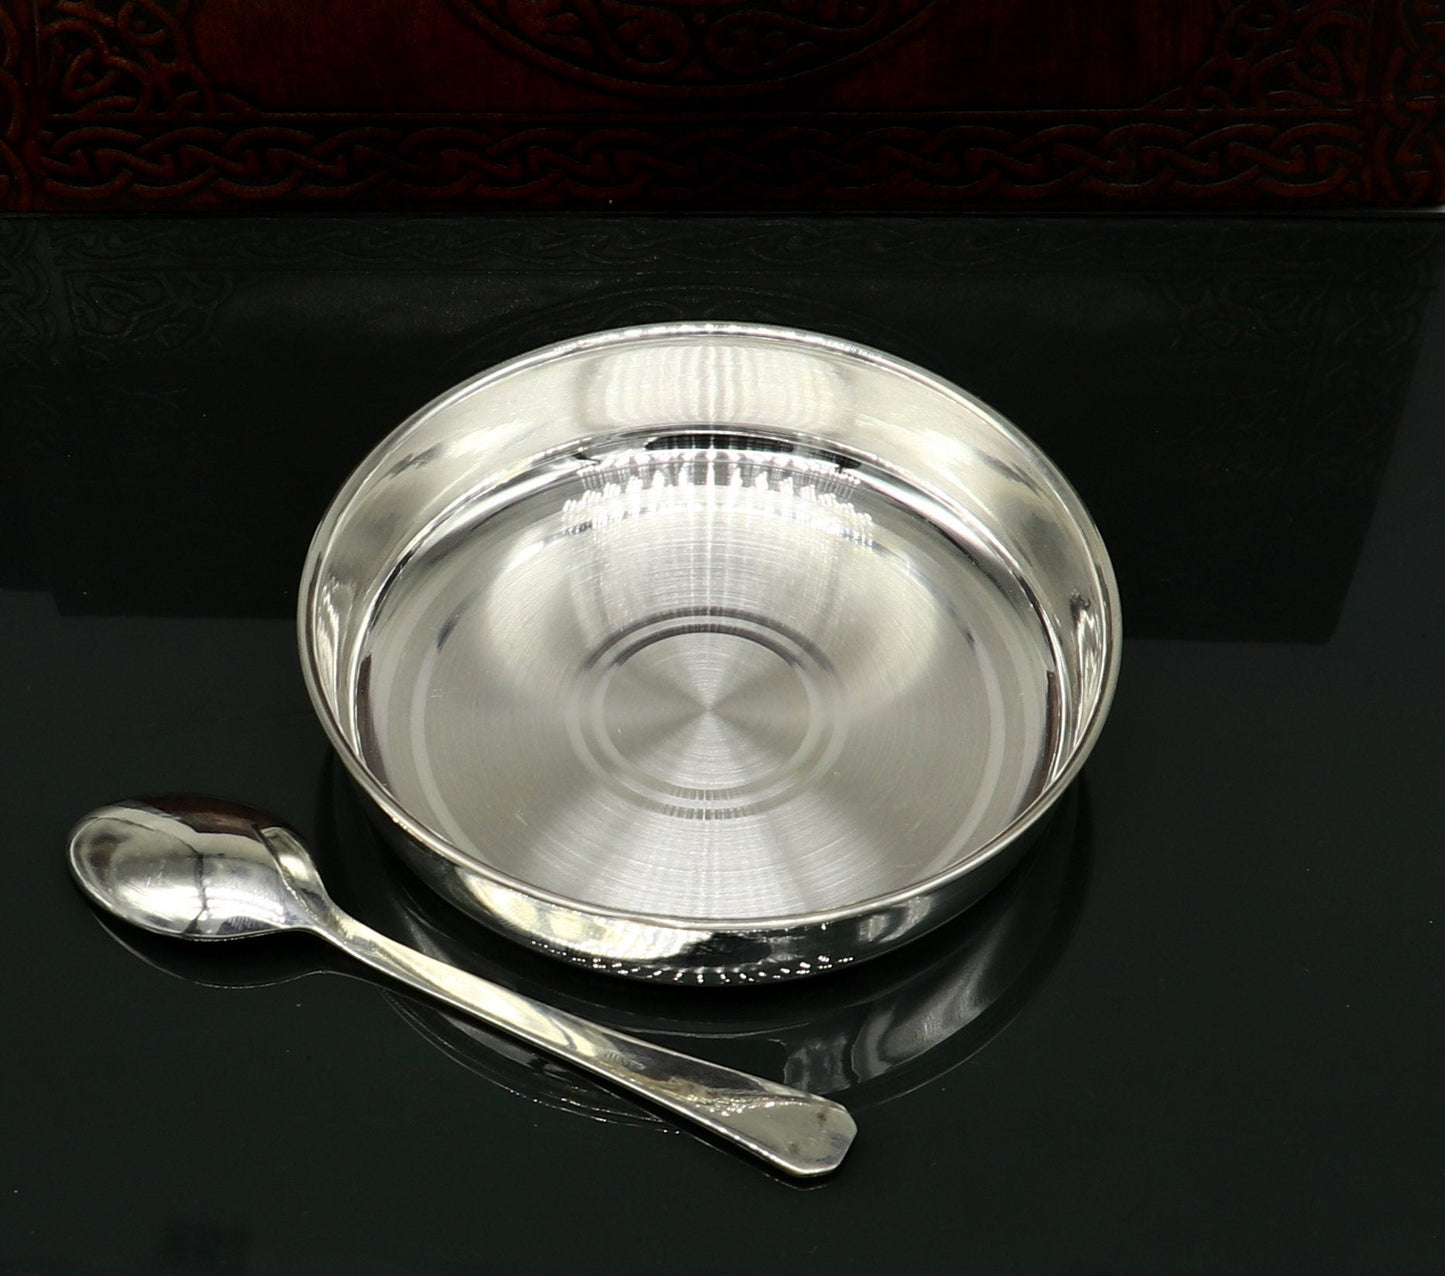 999 fine solid silver Tray or plate, silver vessel, silver baby utensils set, silver puja article, gifting utensils from india sv113 - TRIBAL ORNAMENTS